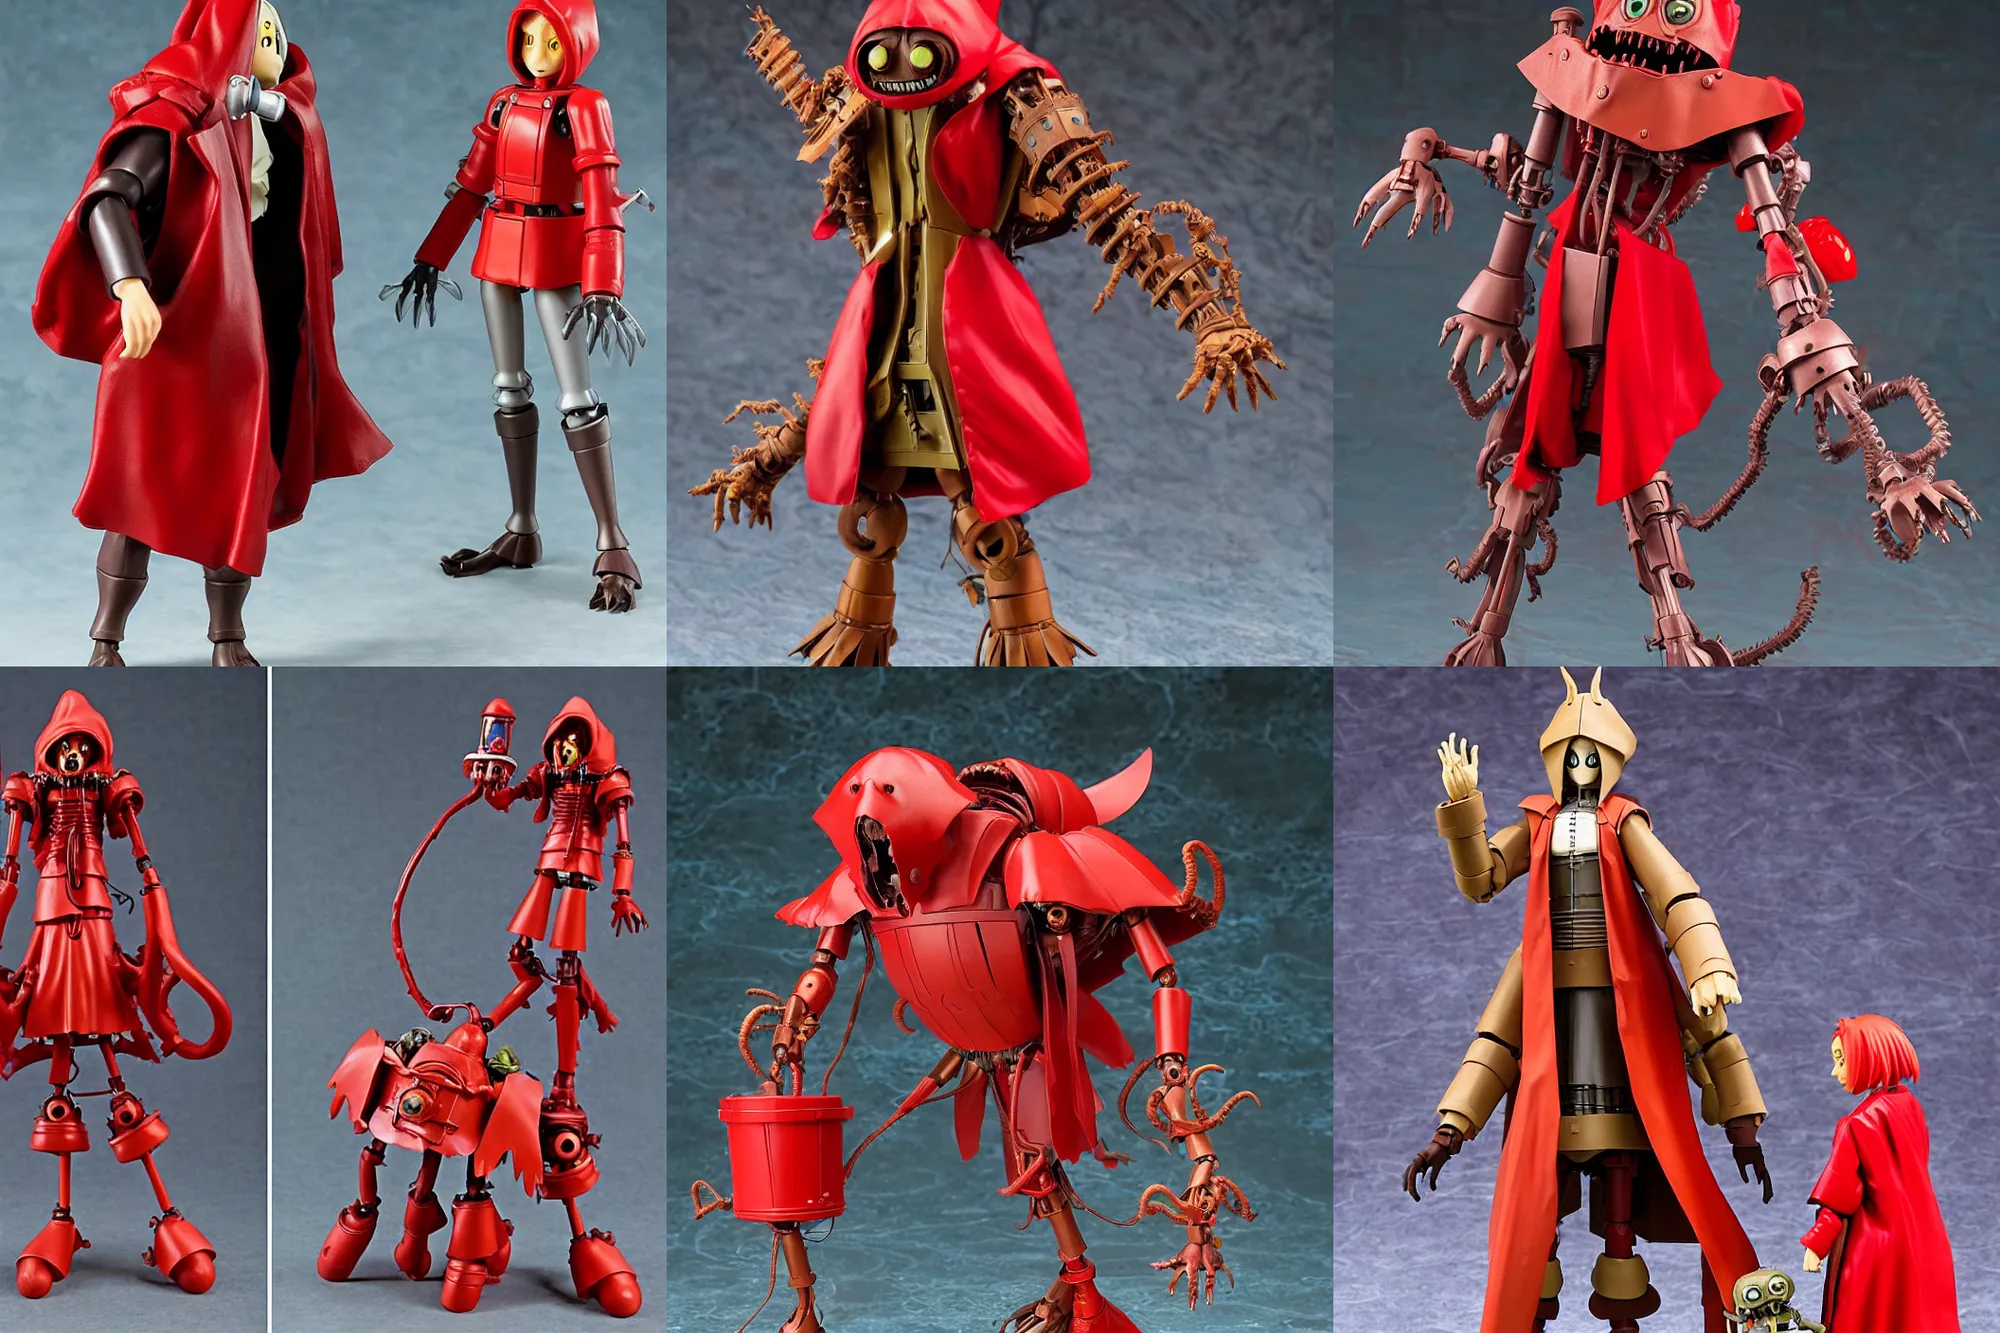 Prompt: A Lovecraftian scary giant mechanized little red riding hood from Studio Ghibli Howl's Moving Castle (2004) as a 1980's Kenner style action figure, 5 points of articulation, full body, 4k, highly detailed. award winning sci-fi. look at all that detail!